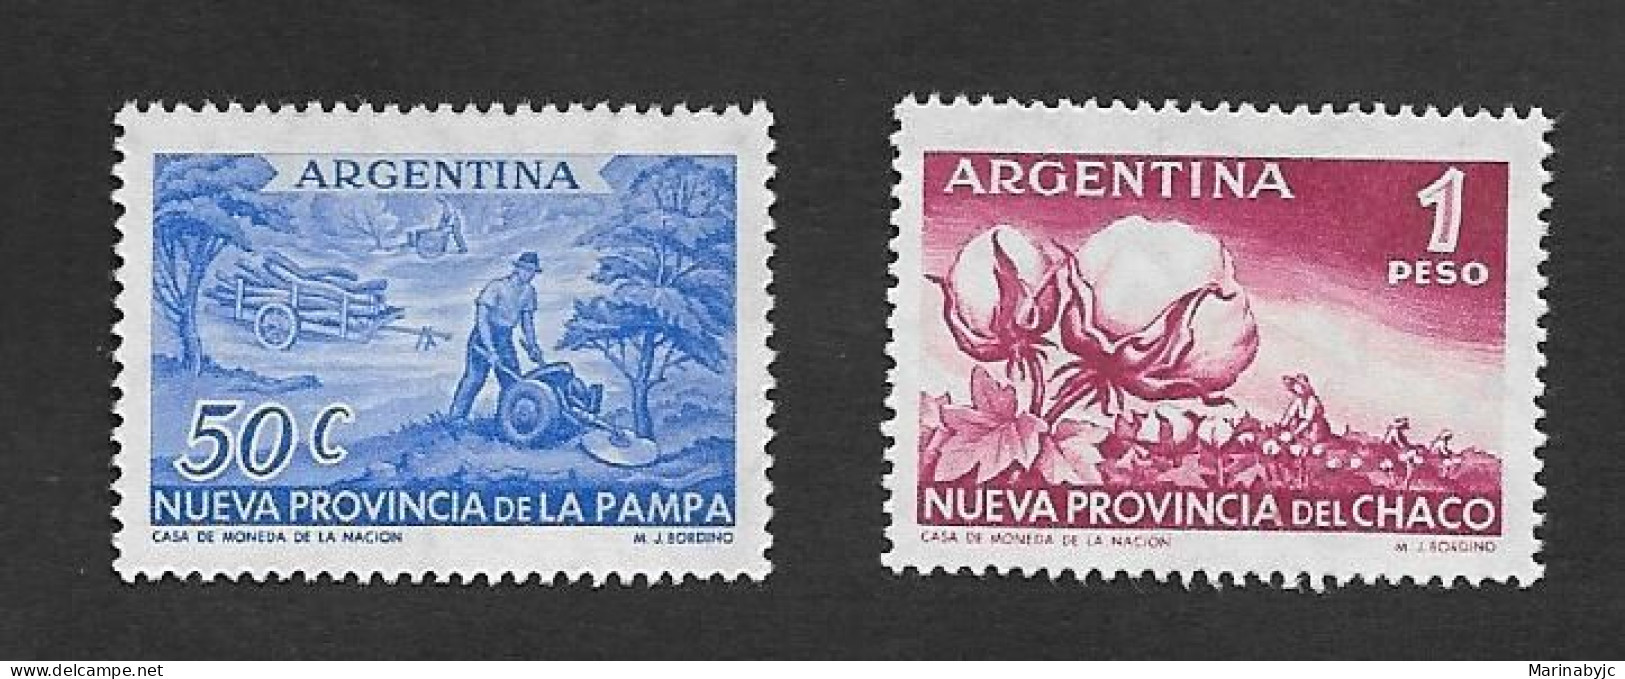 EL)1956 ARGENTINA, NEW PROVINCE OF PAMPA 50C & DEL CHACO 1P, MNH - Used Stamps